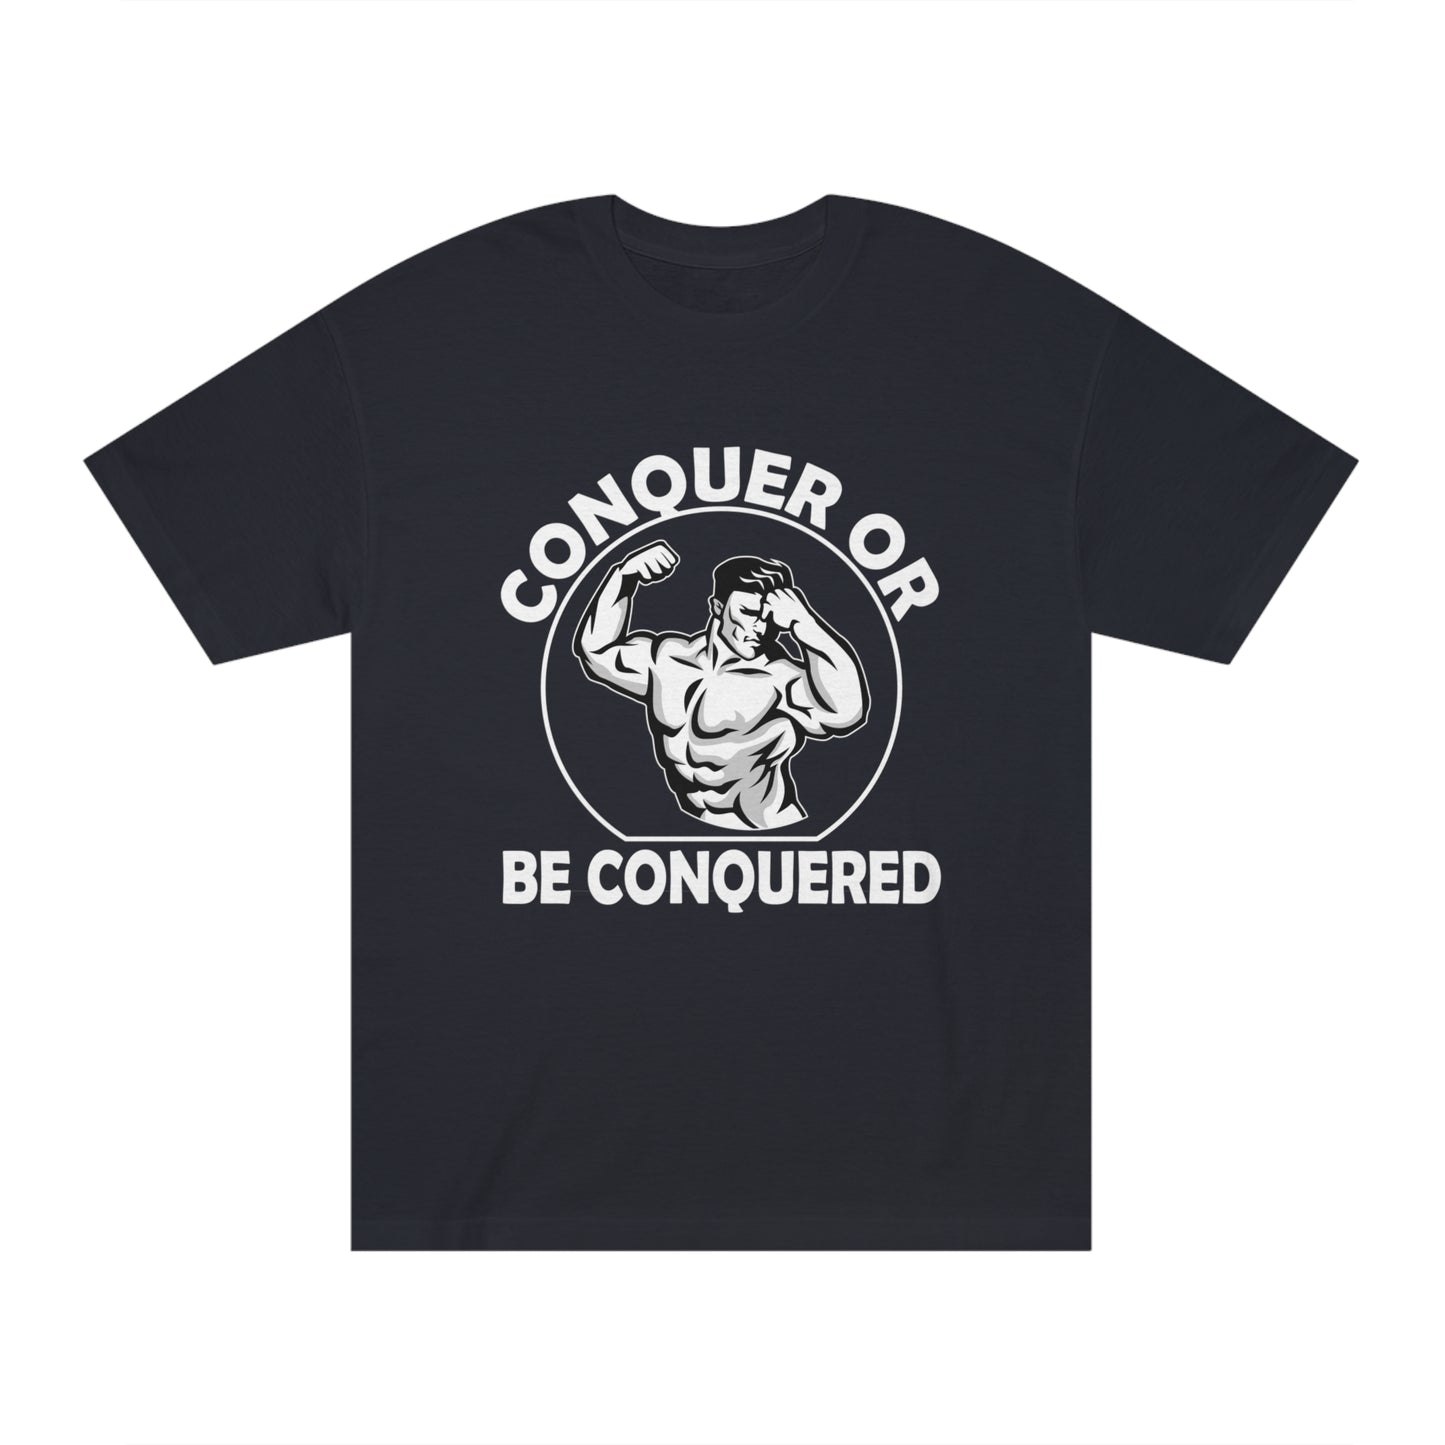 Be conquered Unisex Classic Tee